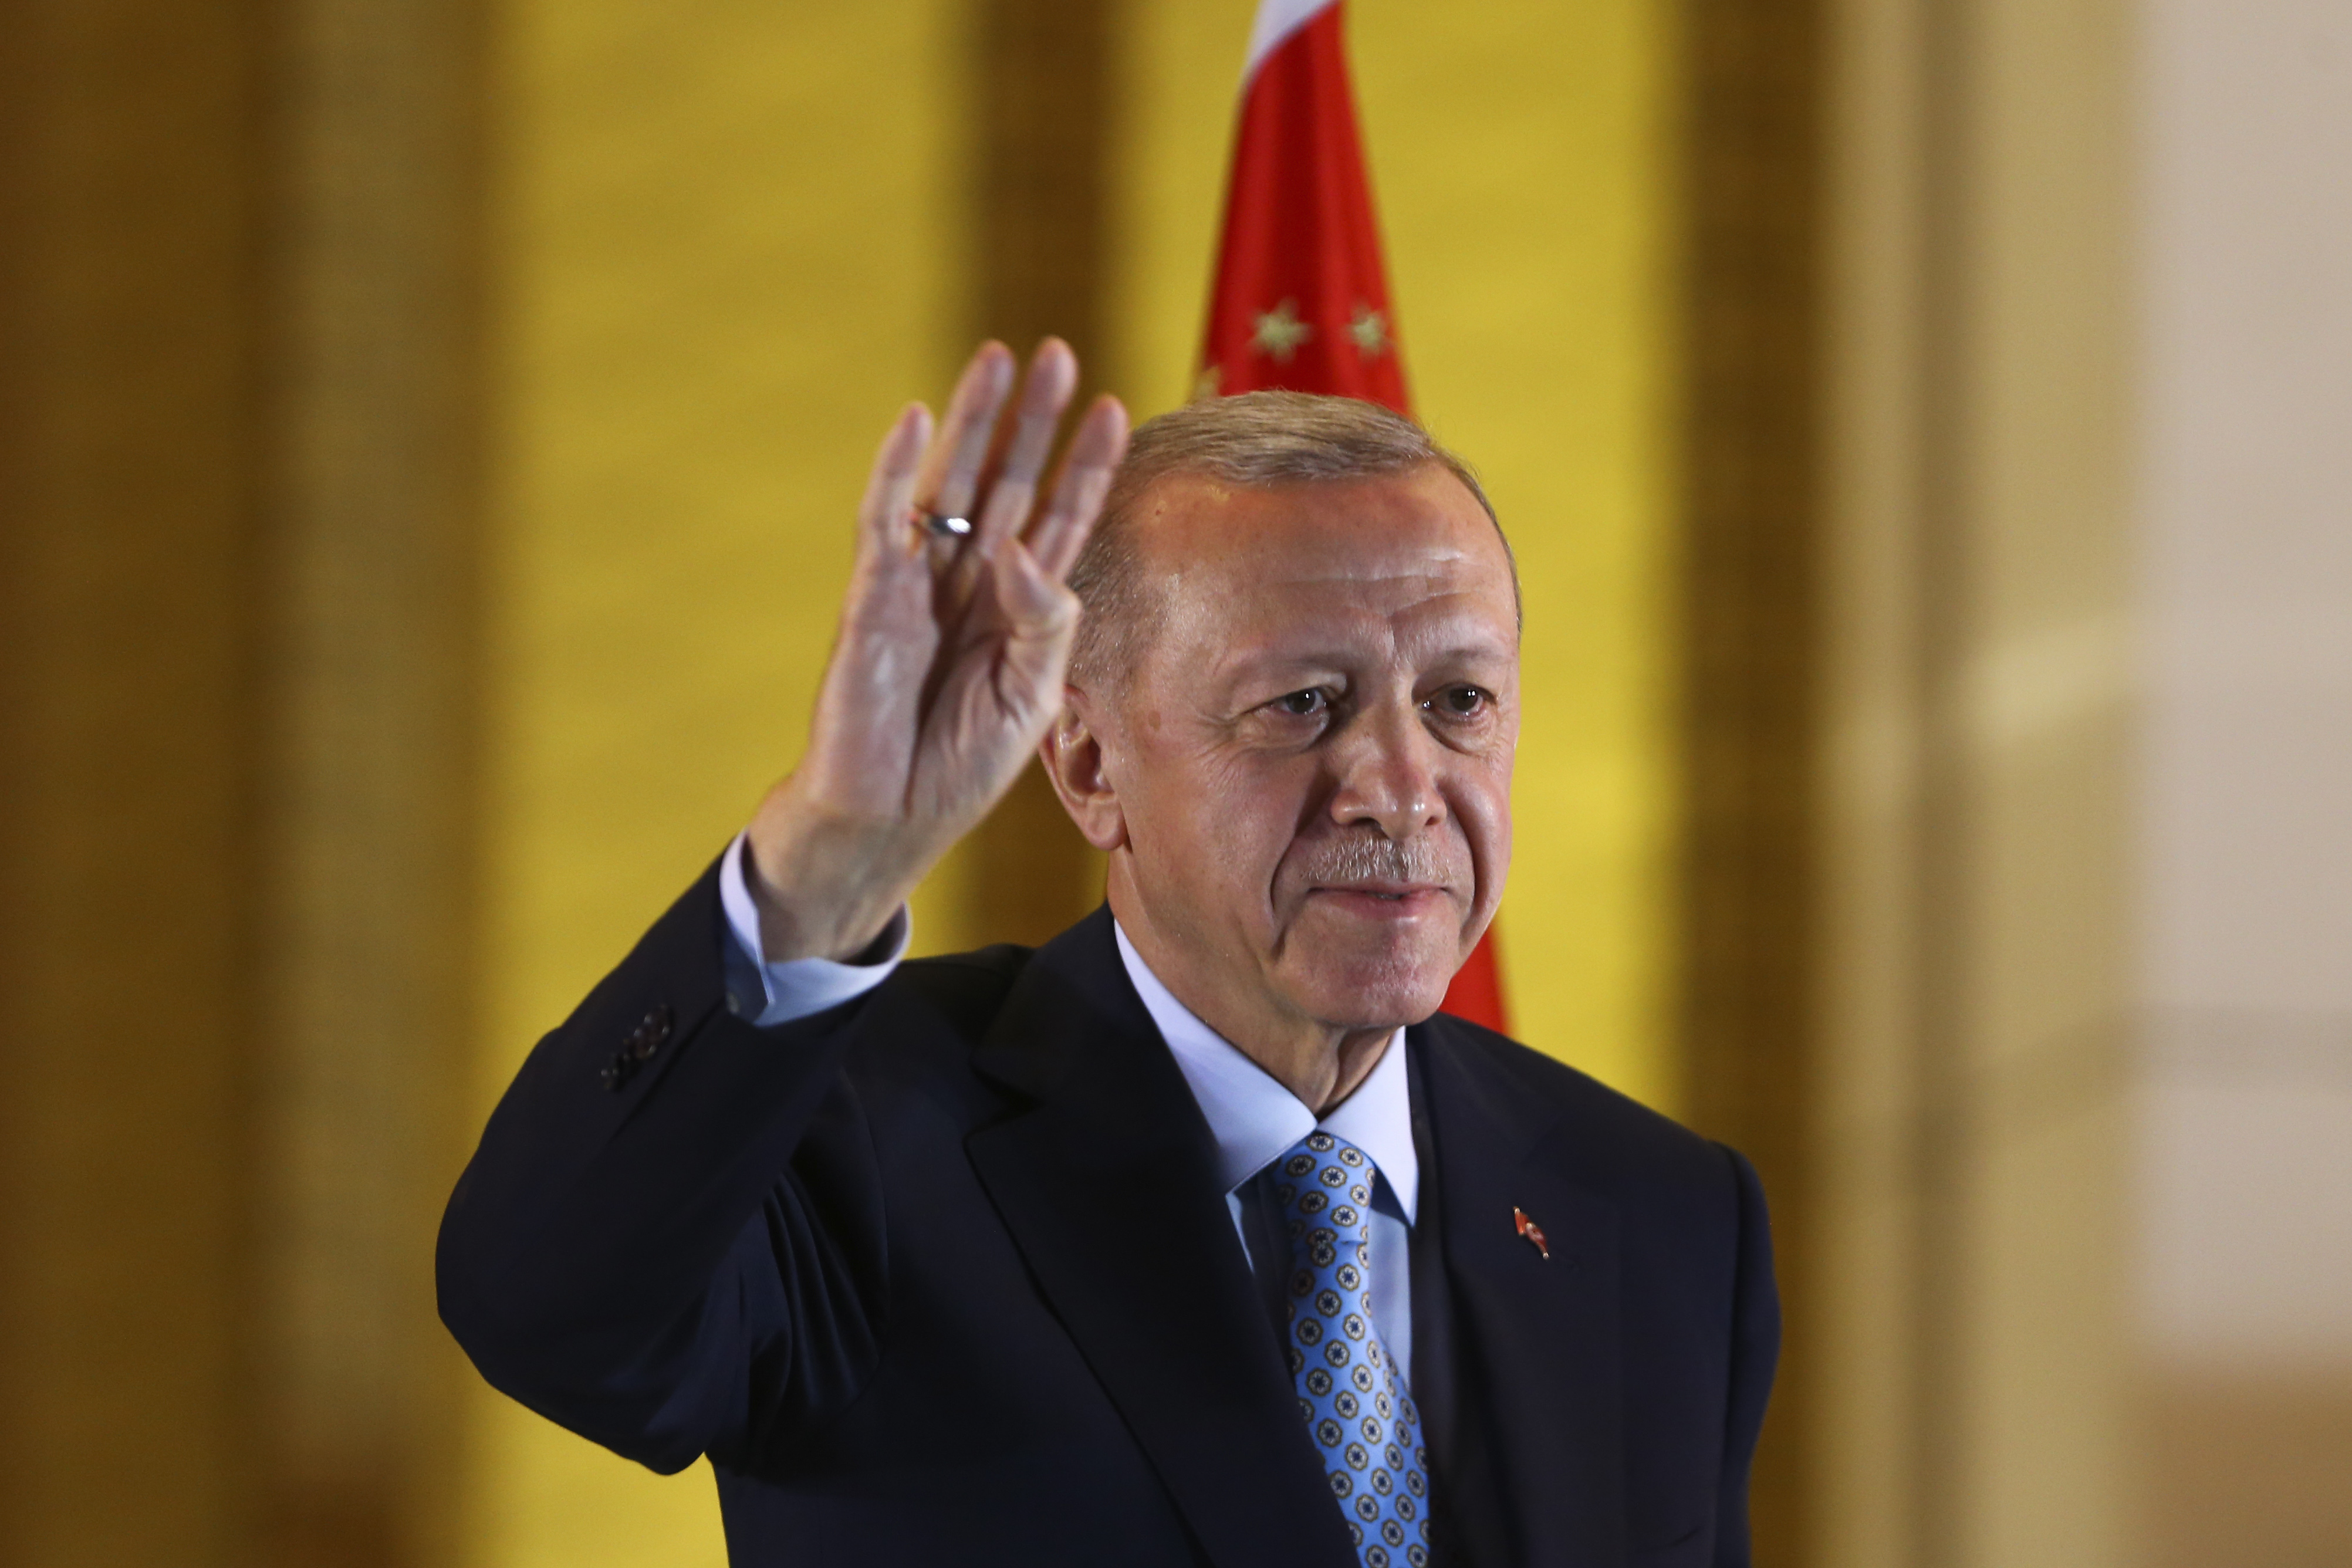 Turkish President and People's Alliance's presidential candidate Recep Tayyip Erdogan gestures to supporters at the presidential palace, in Ankara, Turkey, Sunday, May 28, 2023. Turkey President Recep Tayyip Erdogan won reelection Sunday, extending his increasingly authoritarian rule into a third decade as the country reels from high inflation and the aftermath of an earthquake that leveled entire cities. (AP Photo/Ali Unal)


Associated Press/LaPresse
Only Italy and Spain